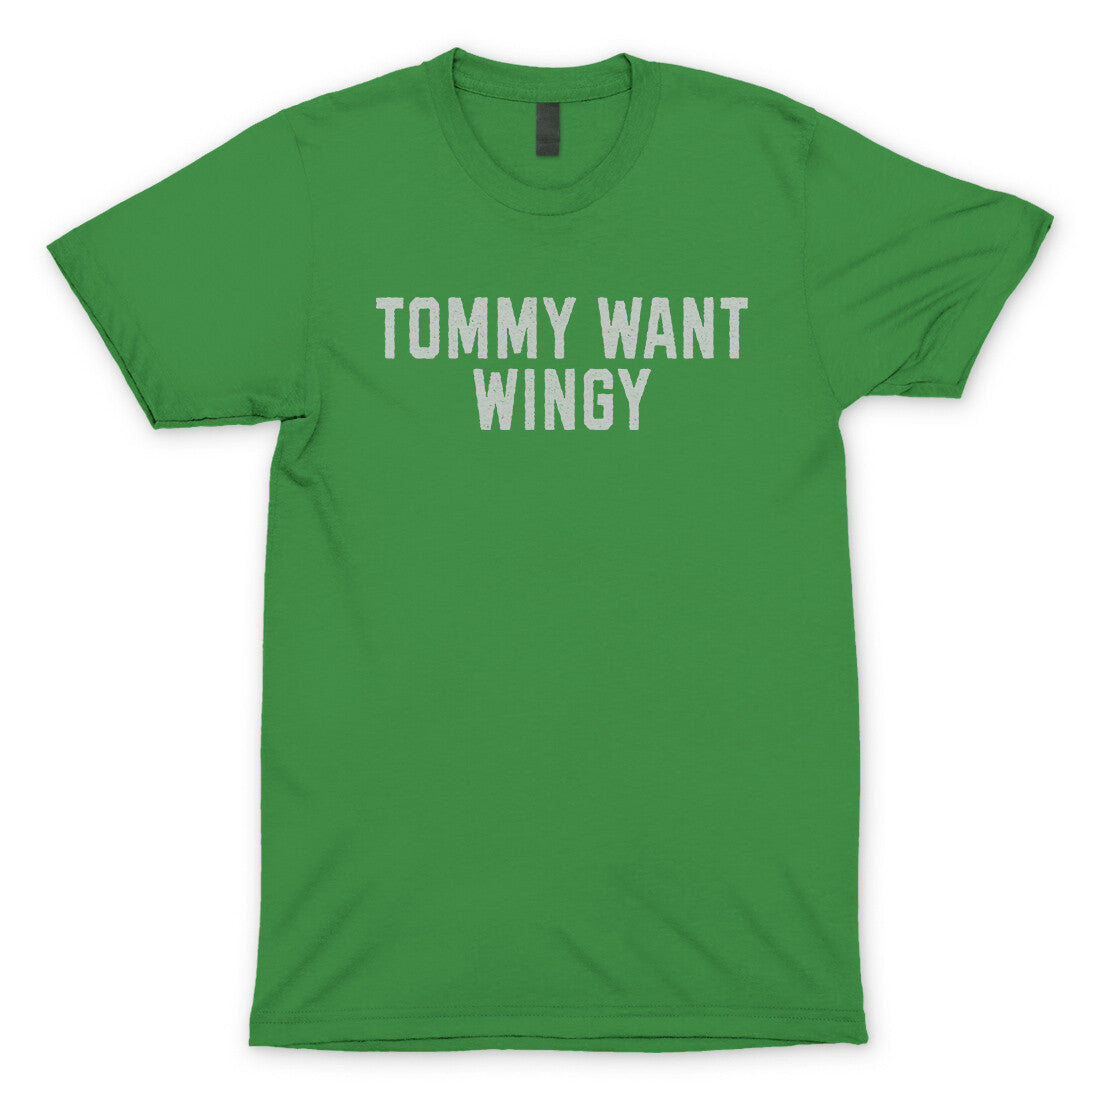 Tommy Want Wingy in Irish Green Color